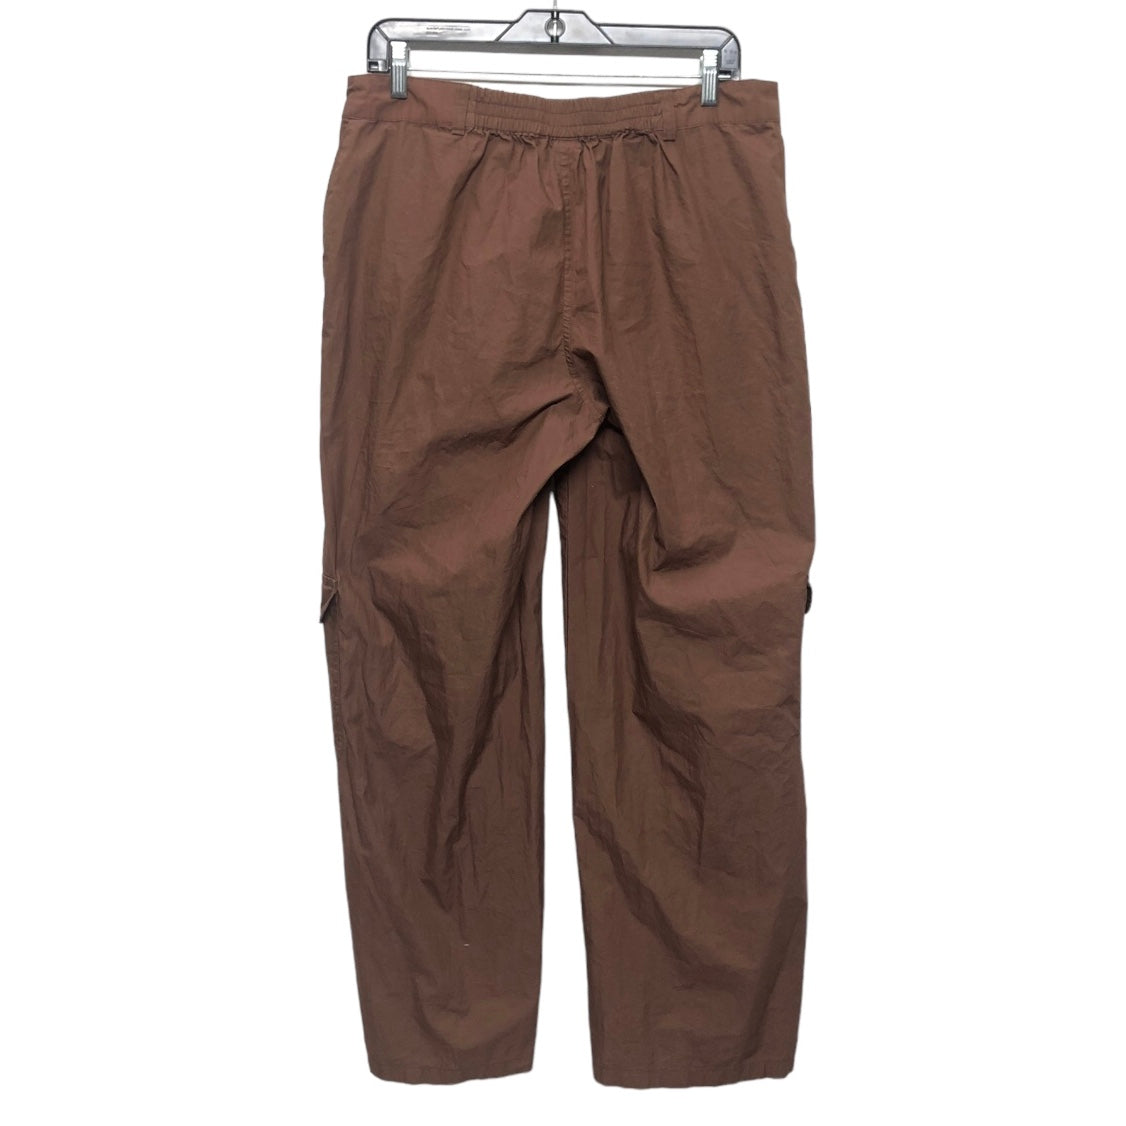 Pants Cargo & Utility By Wild Fable  Size: M